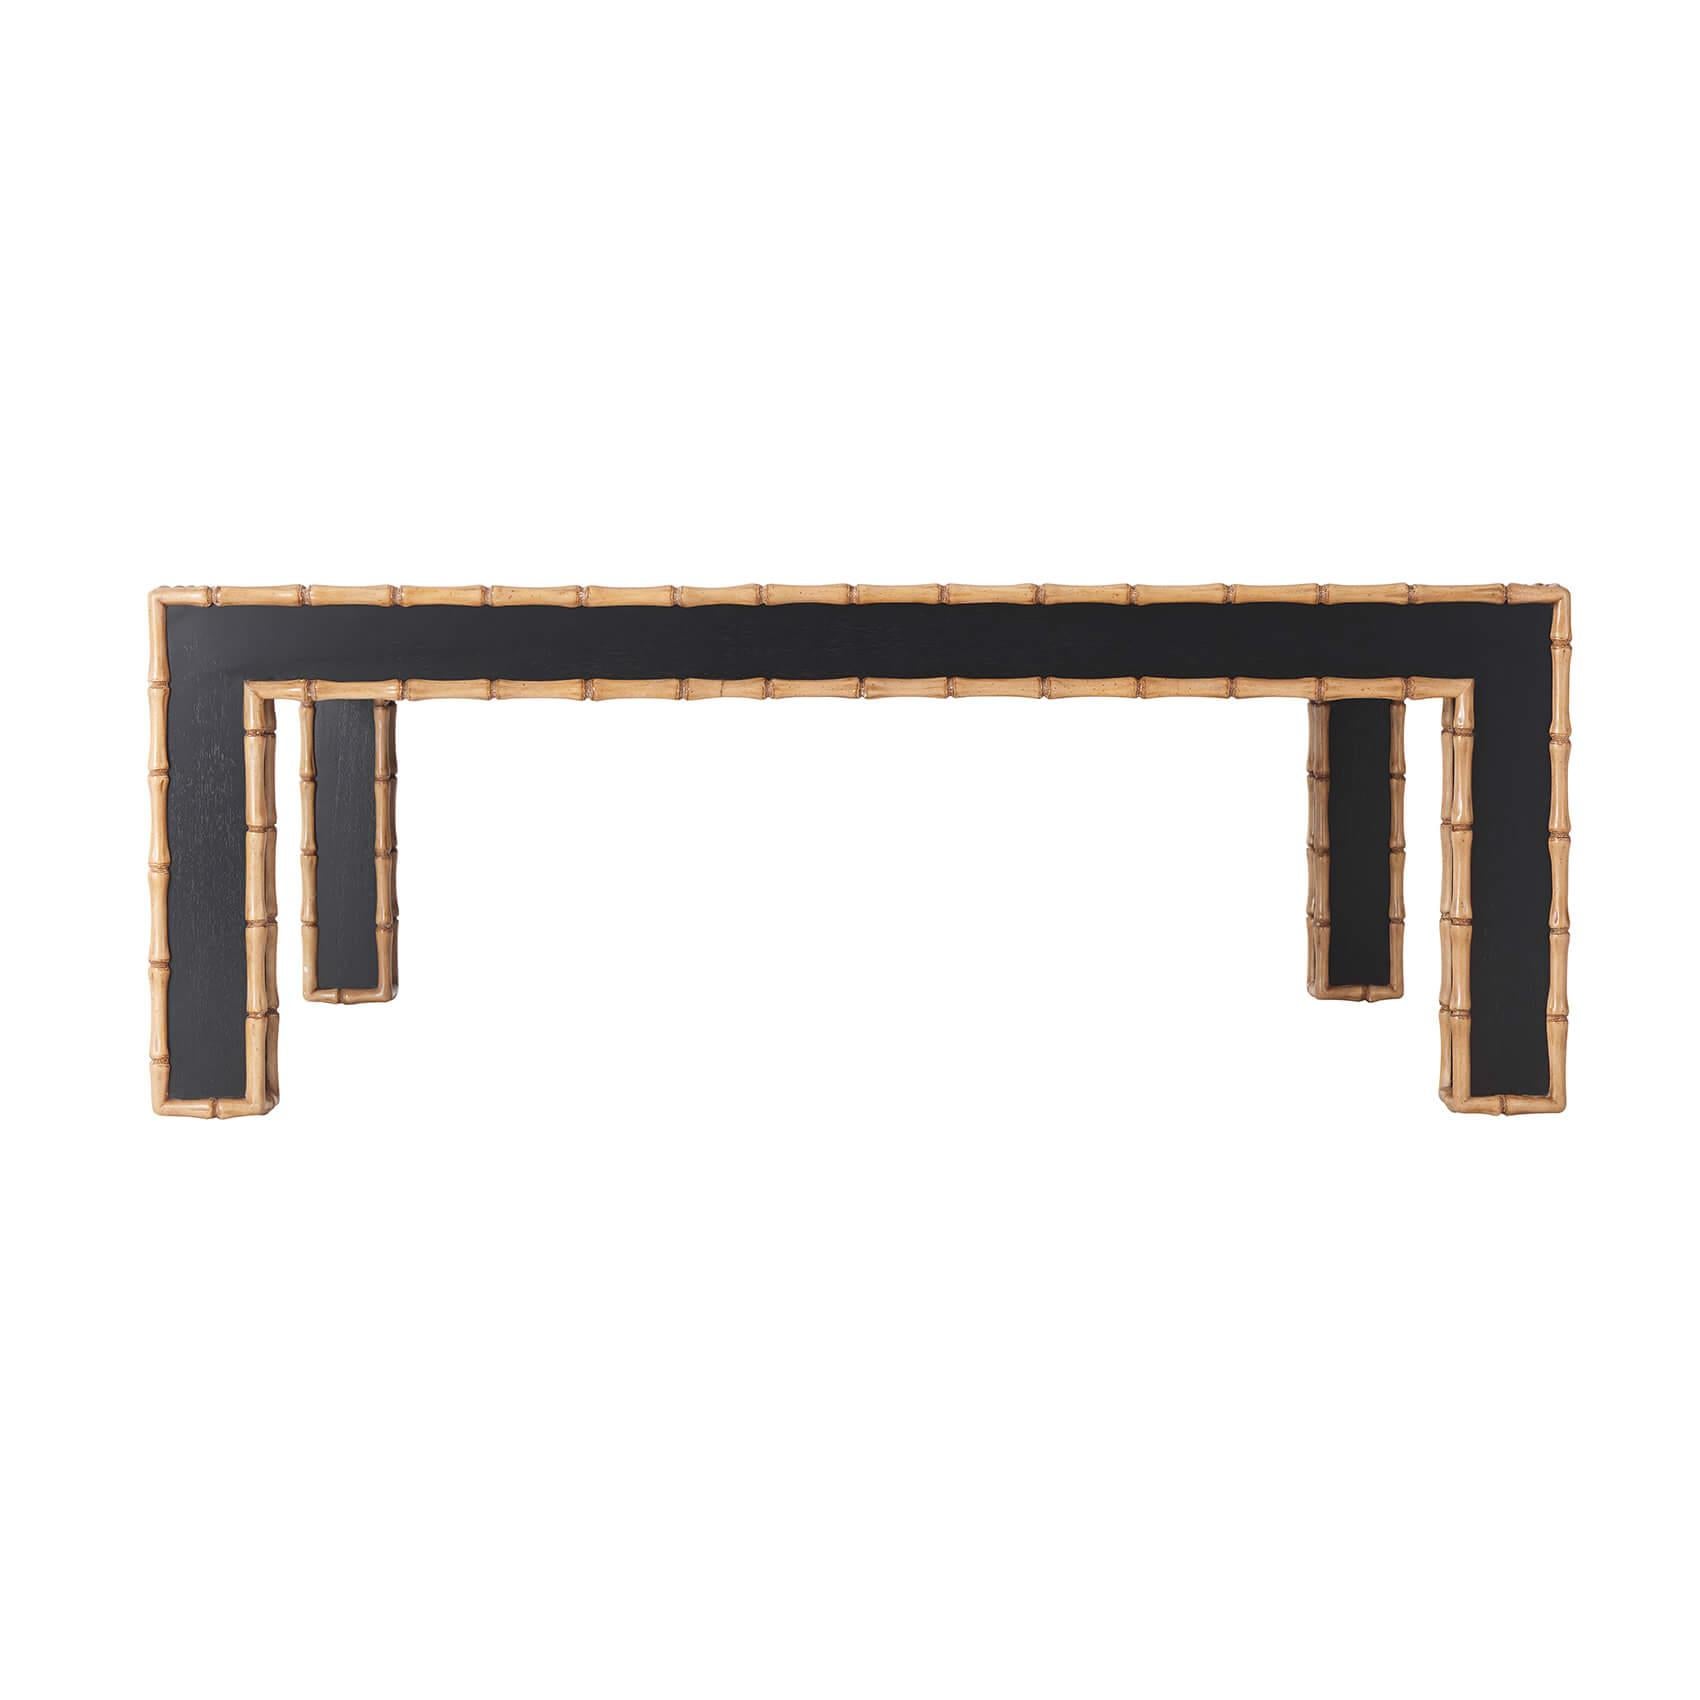 19th century style square cocktail table with a carved faux bamboo edge to the entire frame, a brushed and textured veneered top, and four bold corner supports.

Dimensions: 48